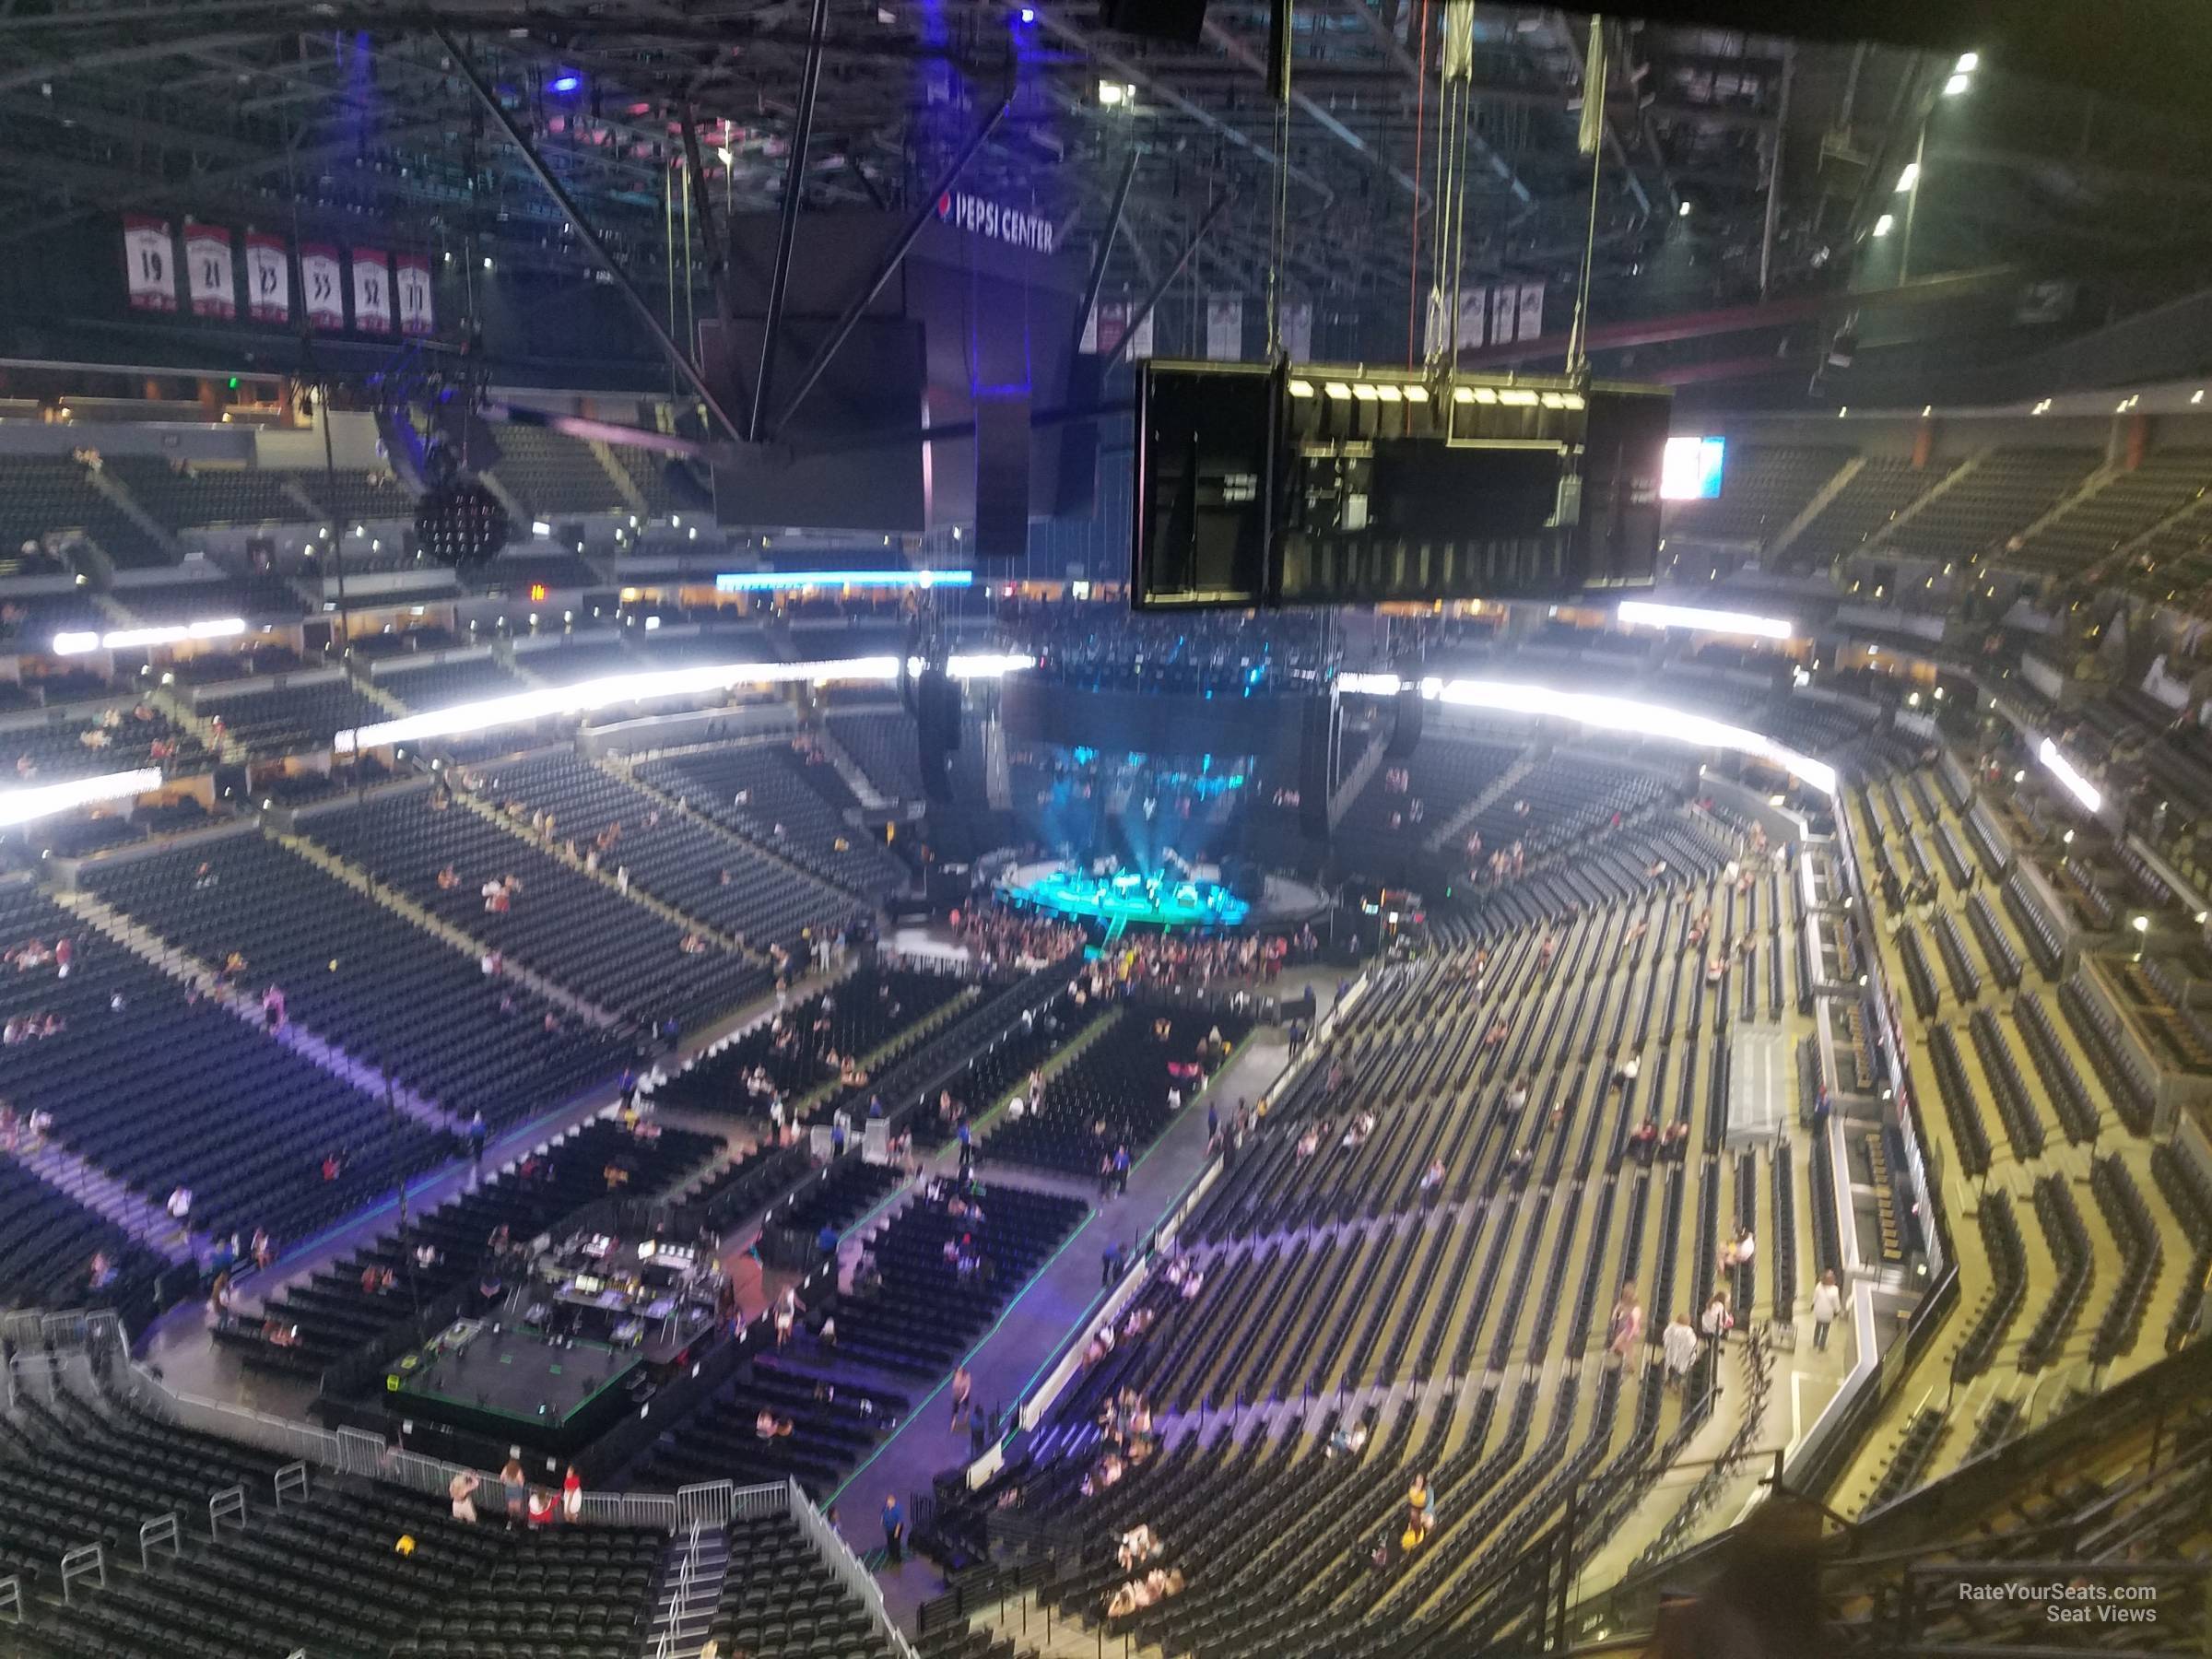 section 316, row 13 seat view  for concert - ball arena